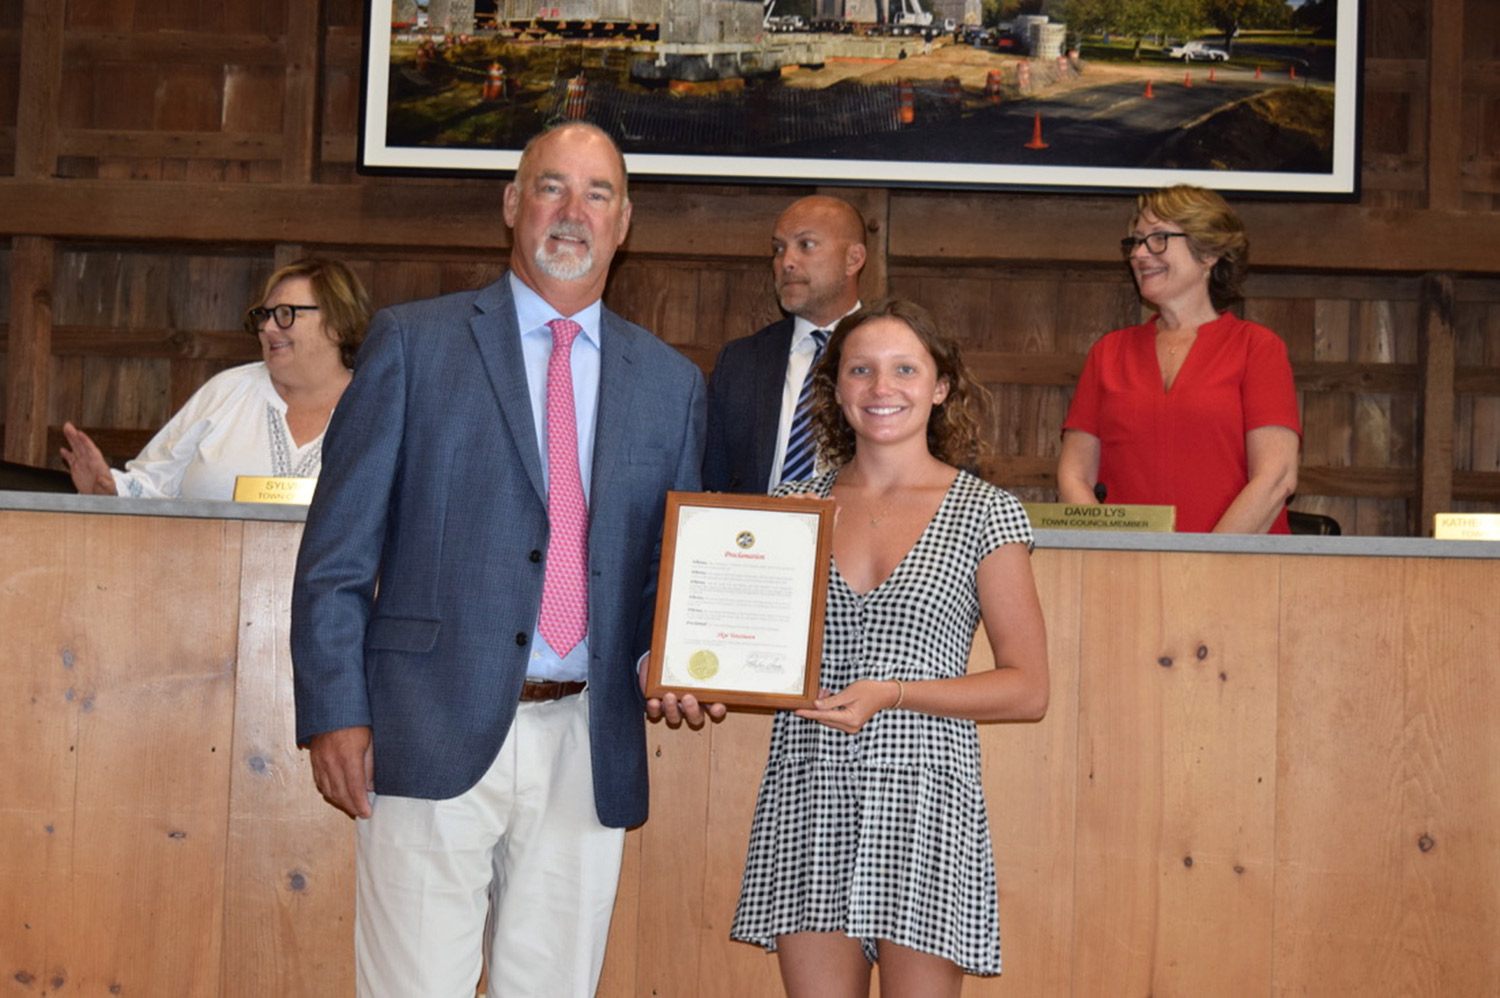 Recognition by the town of Skye Tanzmann & Nick Cooper of their efforts to construct an oyster reef in Accabonac Harbor this Spring 2023. Supervisor Peter Van Scoyoc presented the certificate. Photo Christopher Walsh